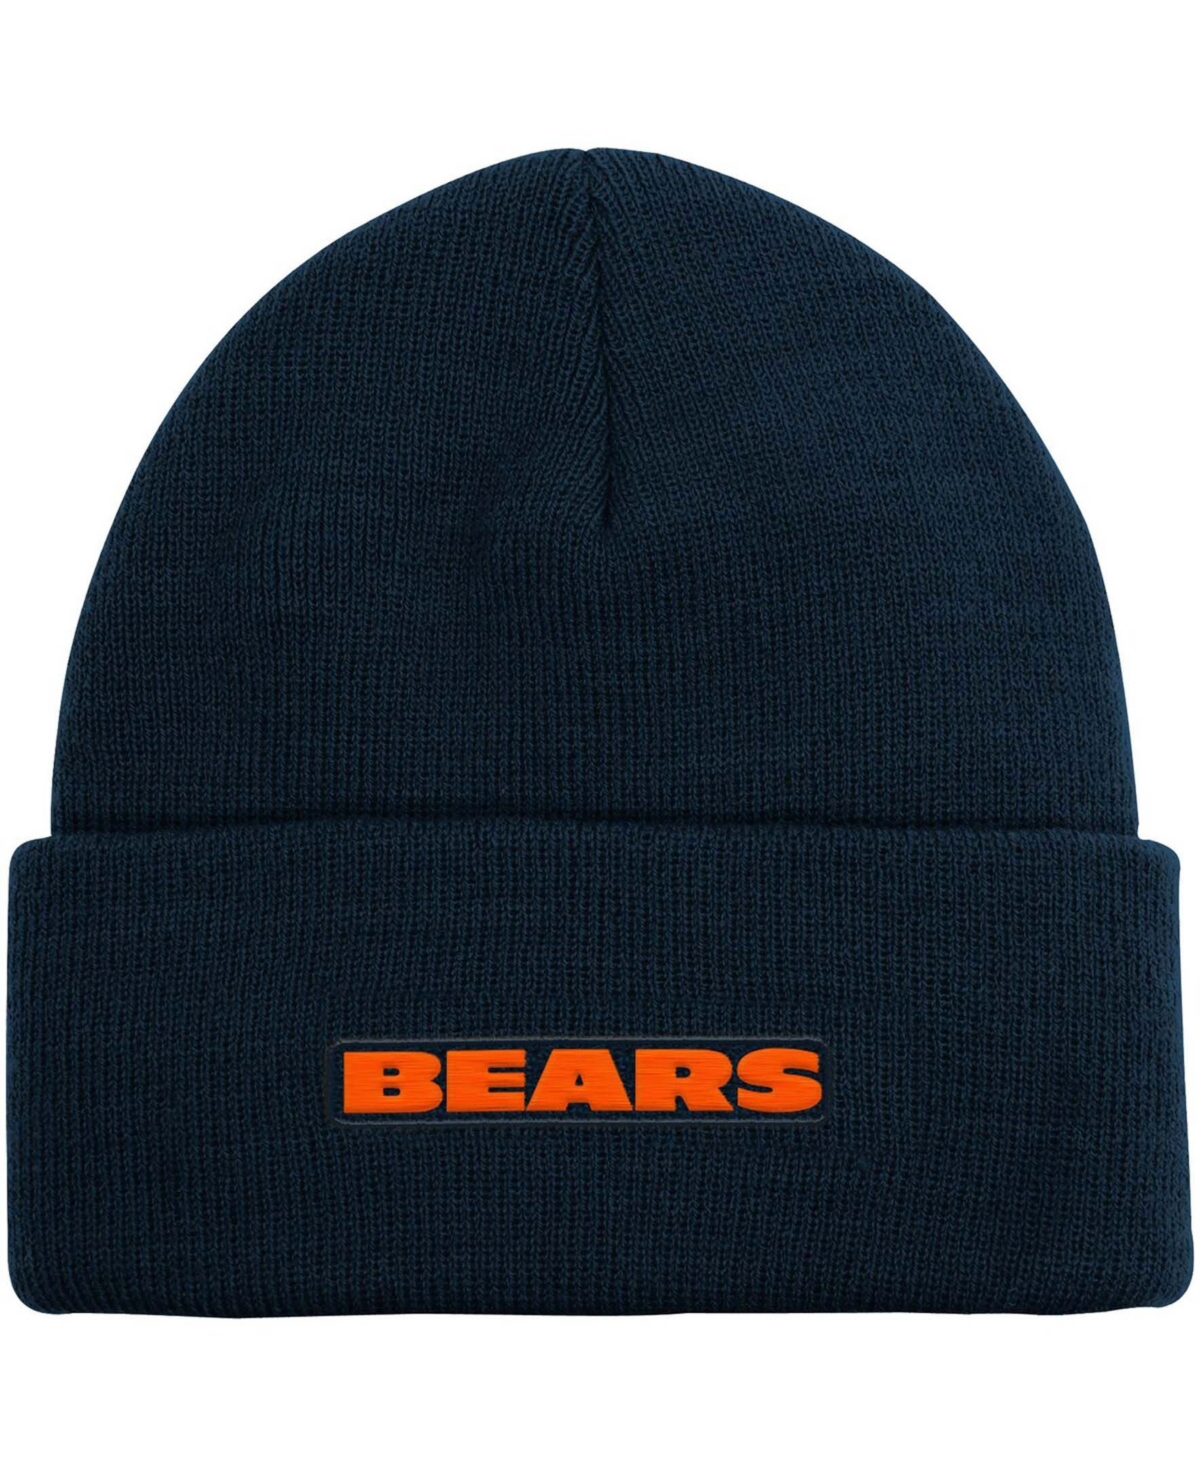 Shop Outerstuff Big Boys And Girls Navy Chicago Bears Basic Cuffed Knit Hat